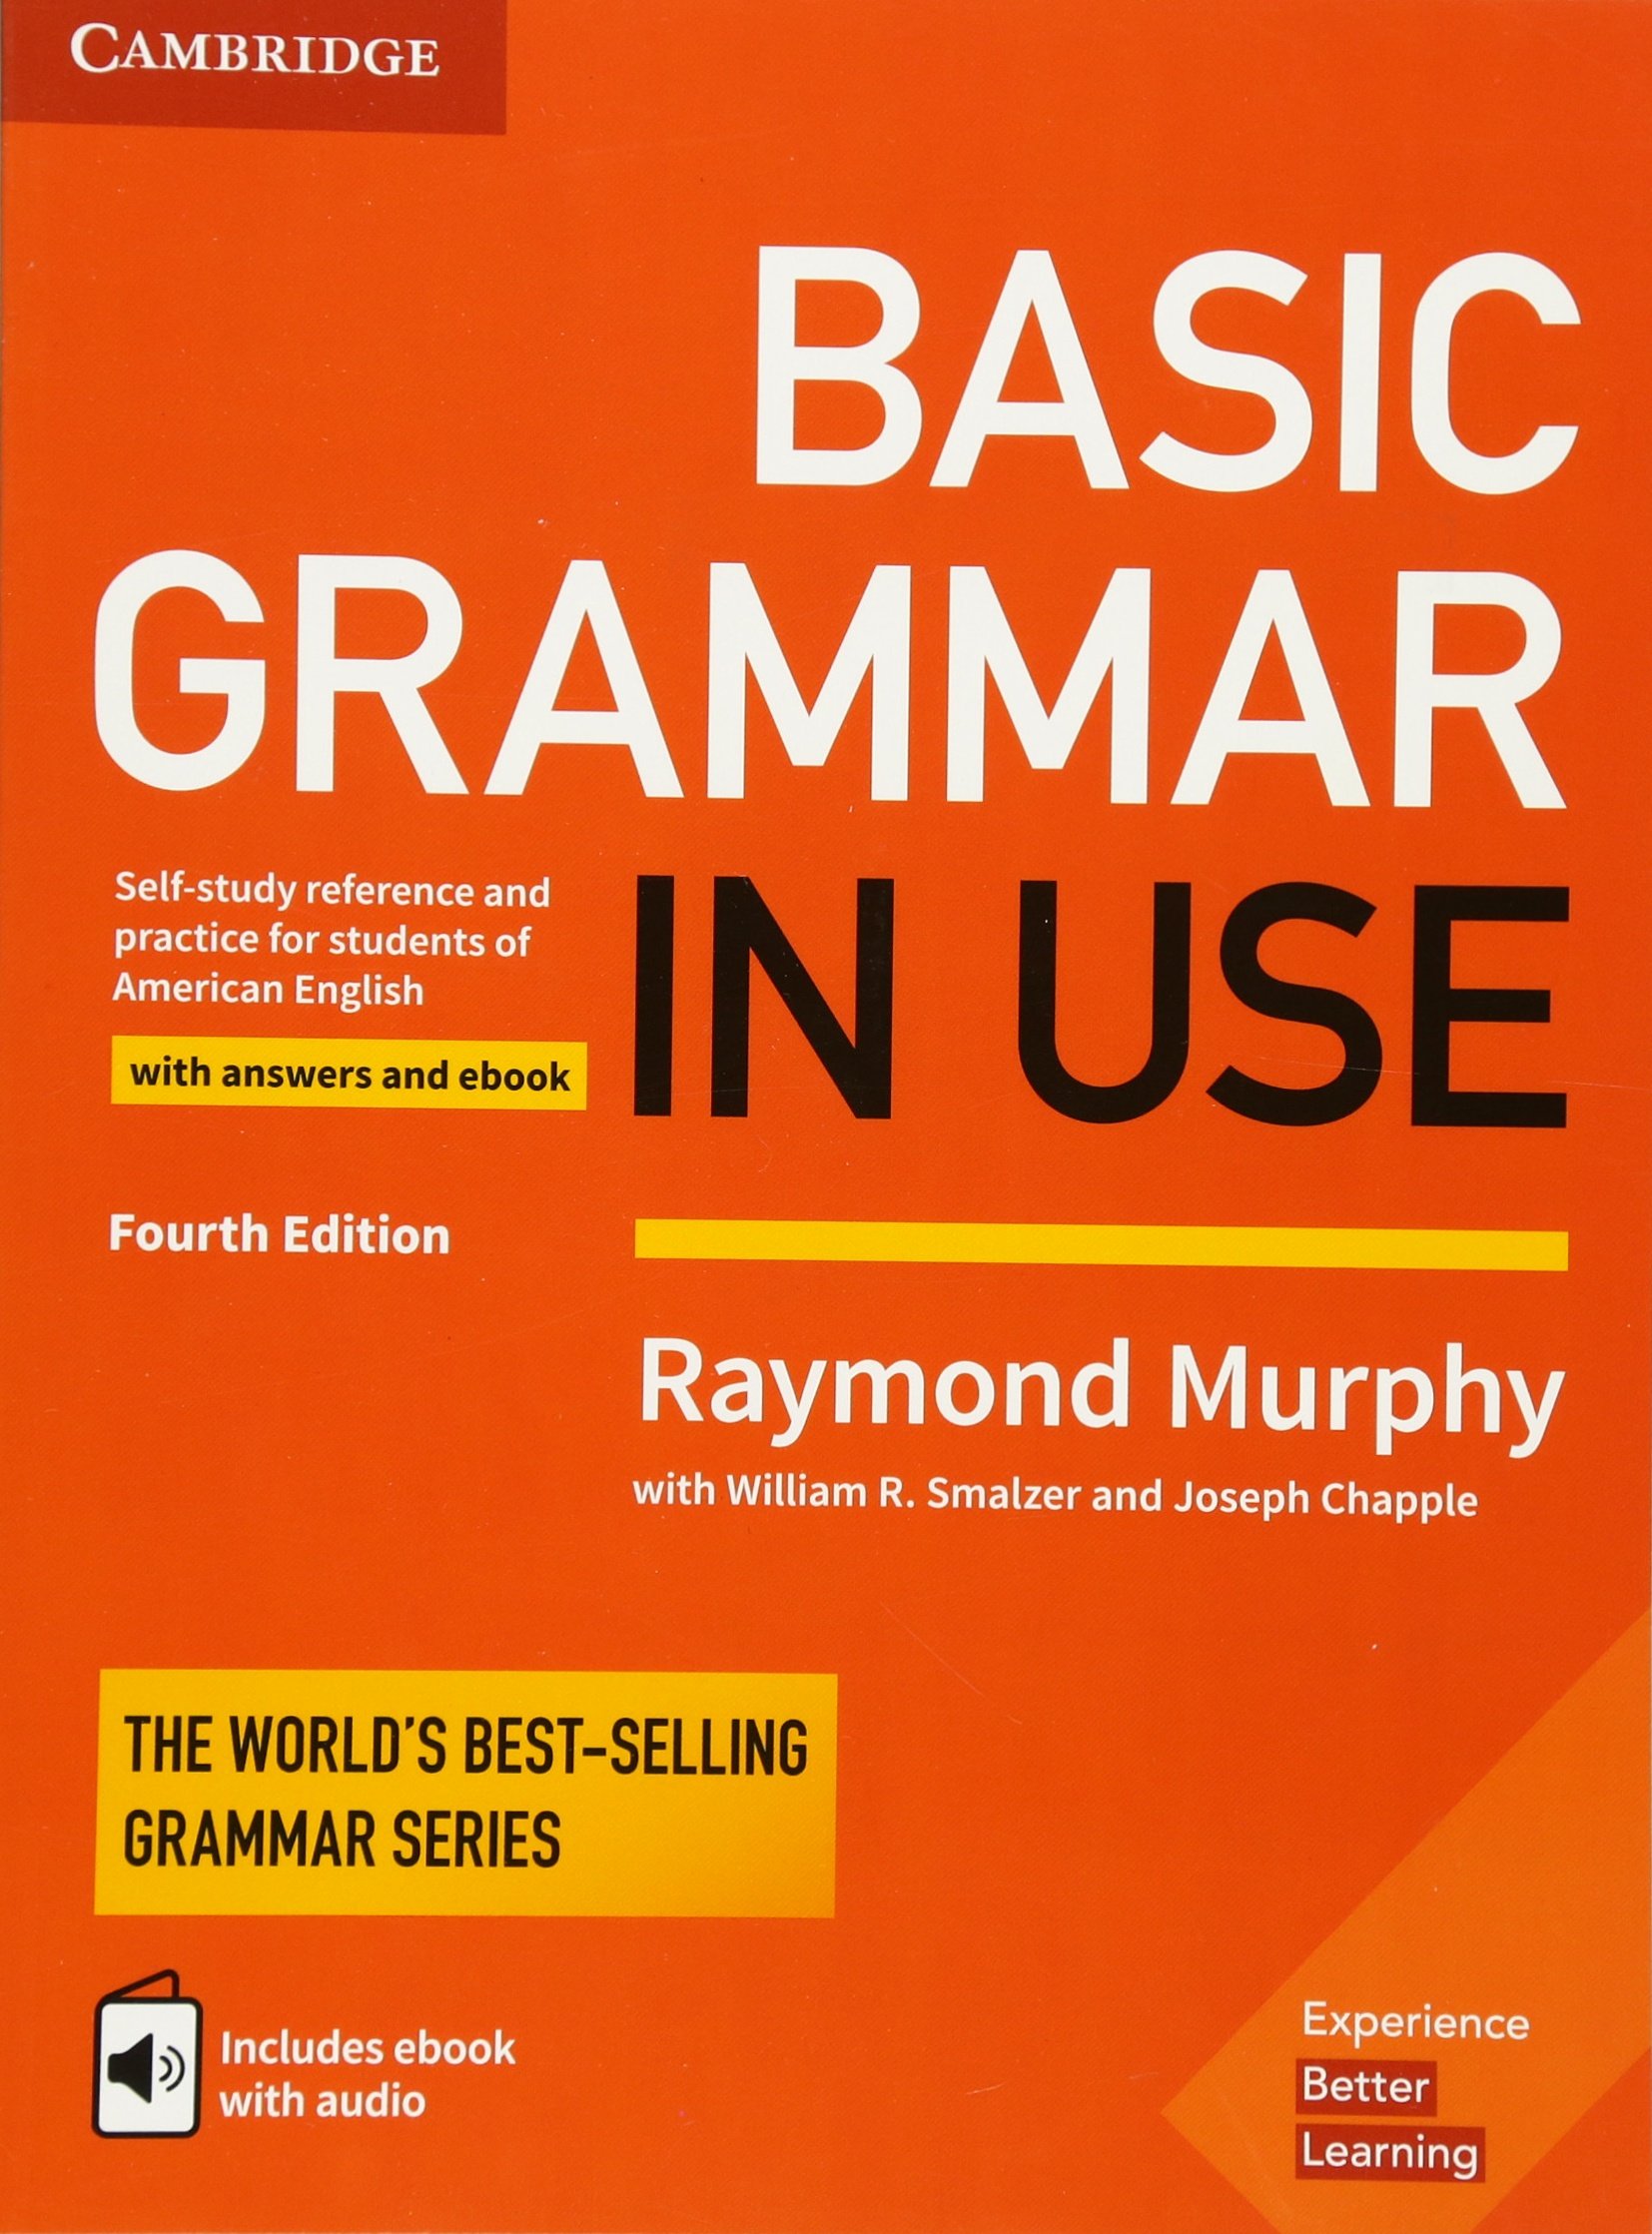 Basic　Book　and　Use　Raymond　Grammar　Answers　eBook　with　in　Interactive　Student's　Murphy